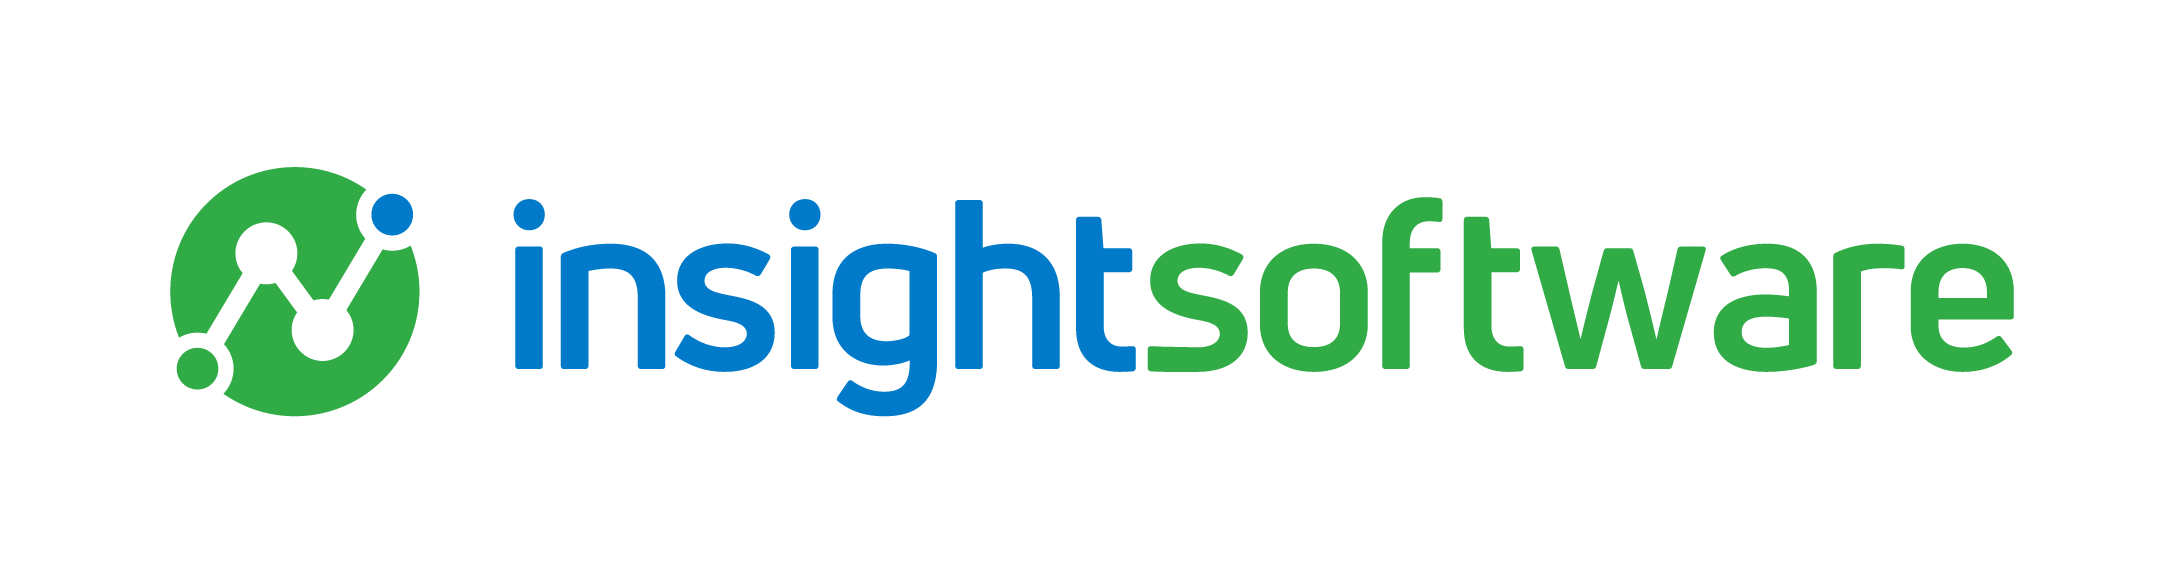 insightsoftware Acce